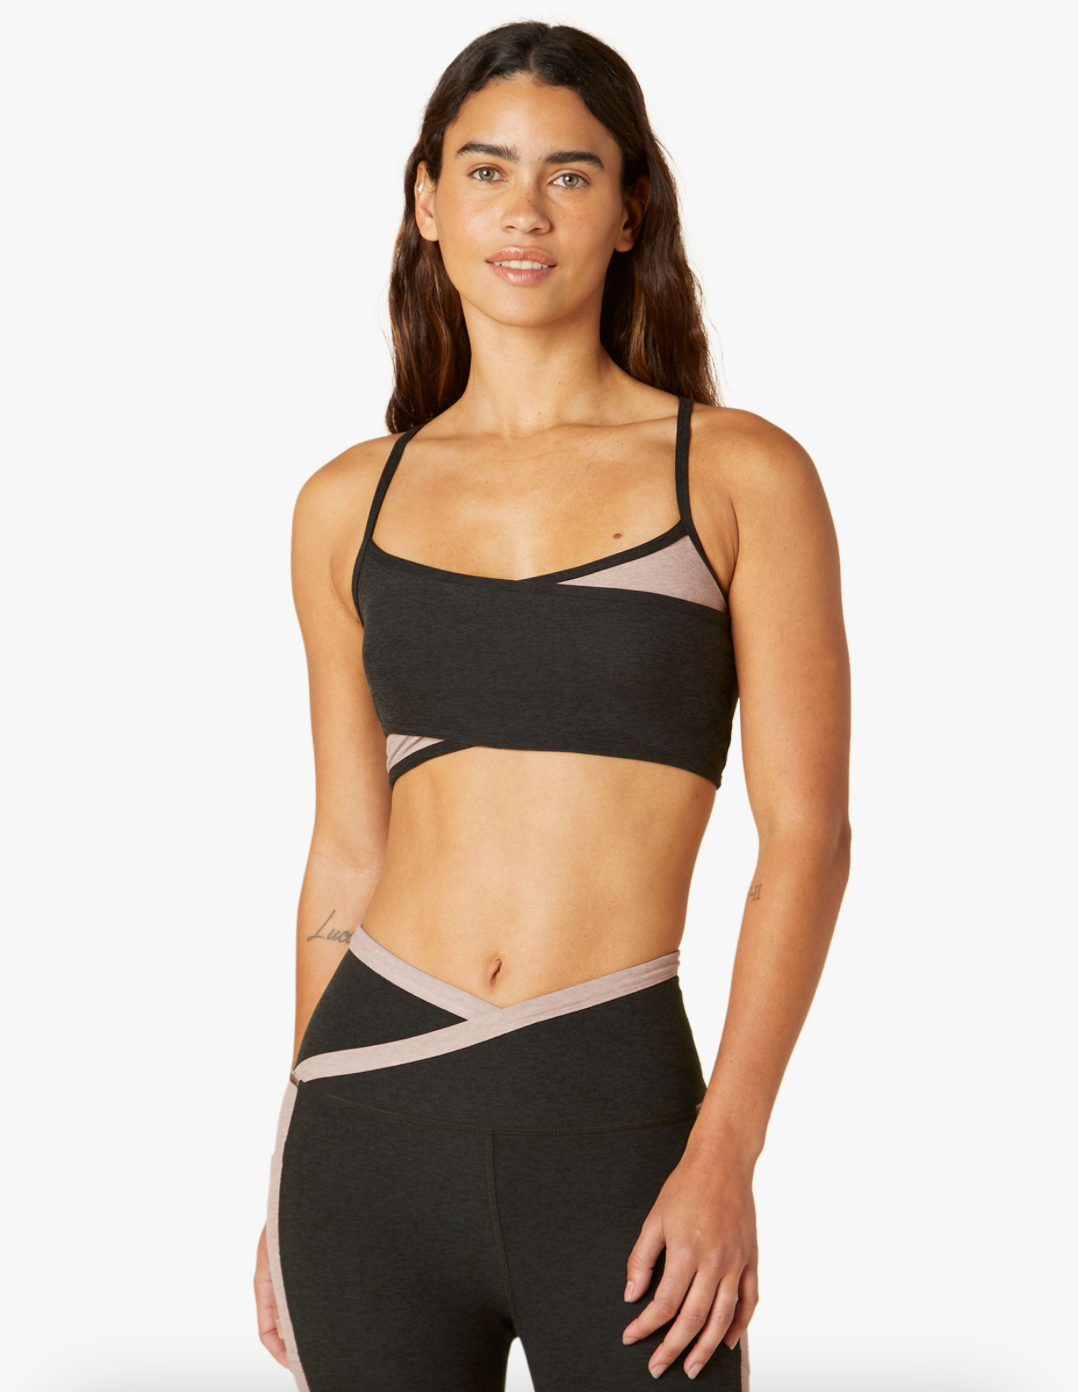 Is That The New Contrast Binding Racer Back Sports Bra & Shorts